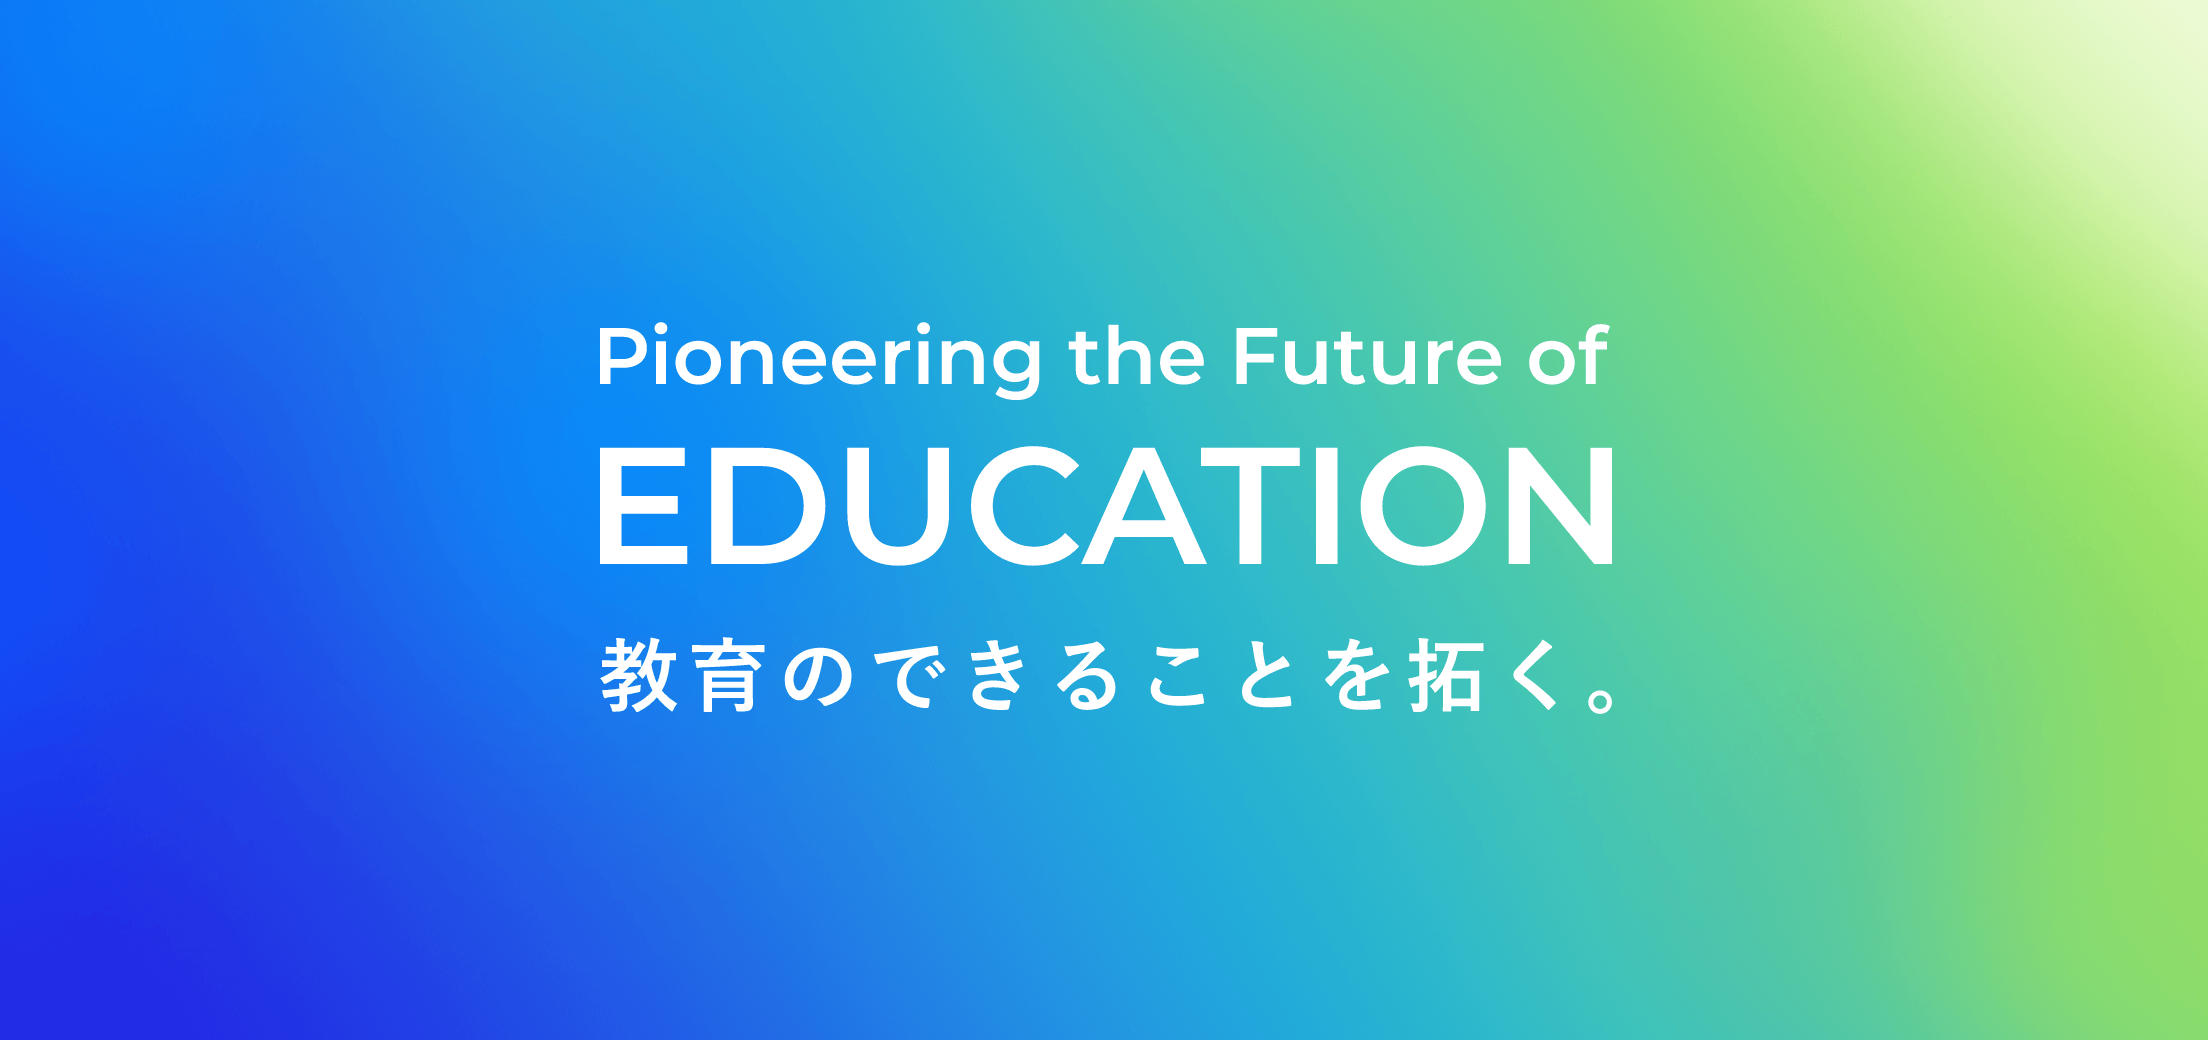 Pioneering the Future of Education